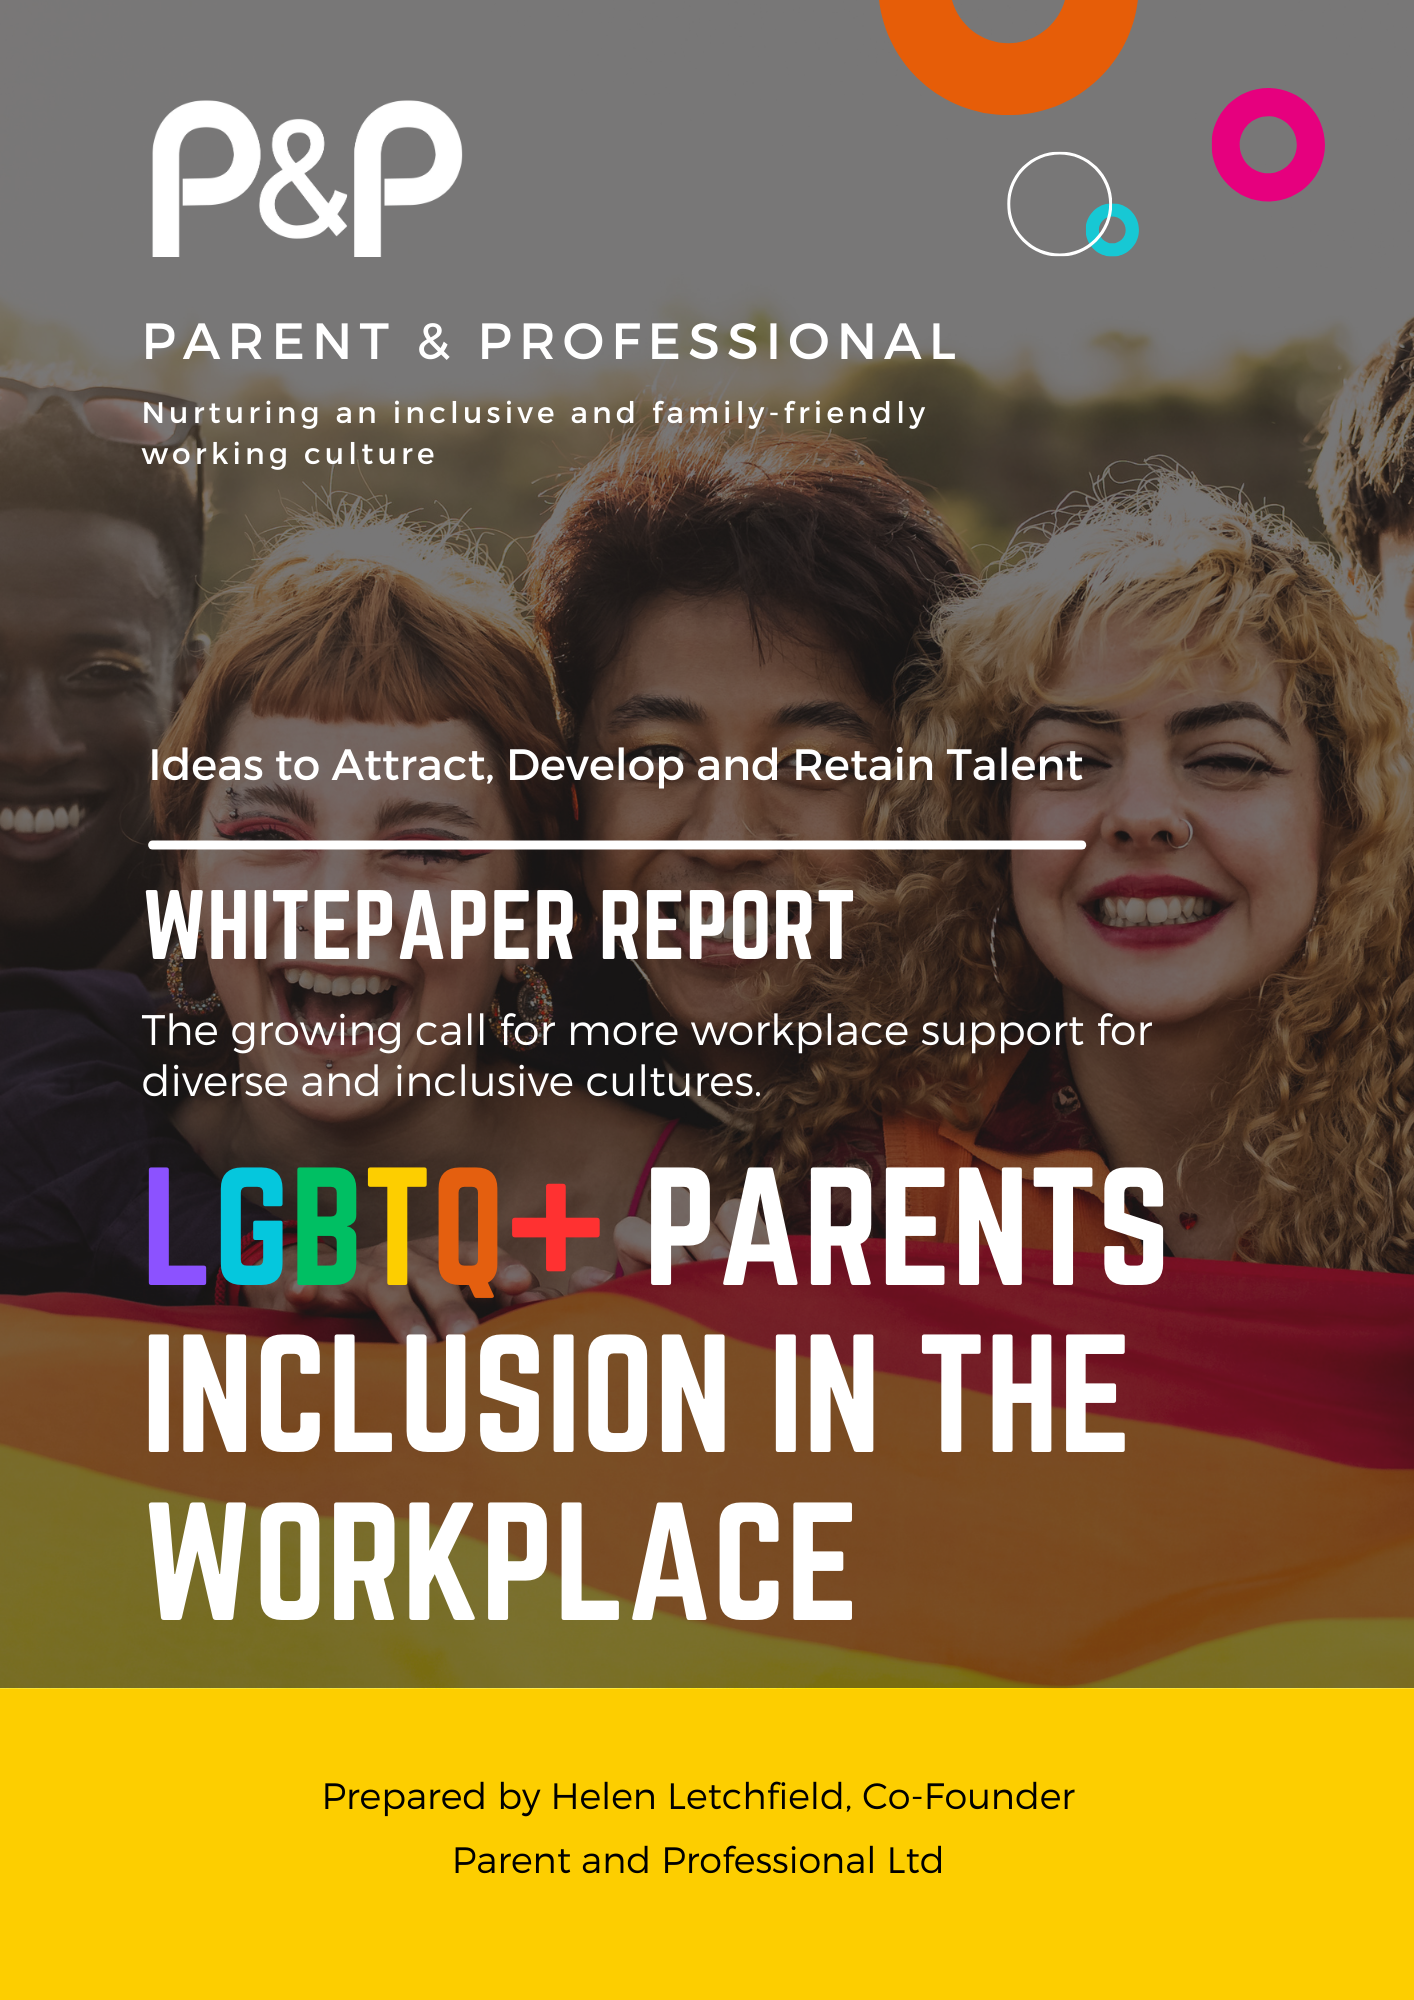 P&P White Paper LGBTQ+ Parents in the Workplace (2)